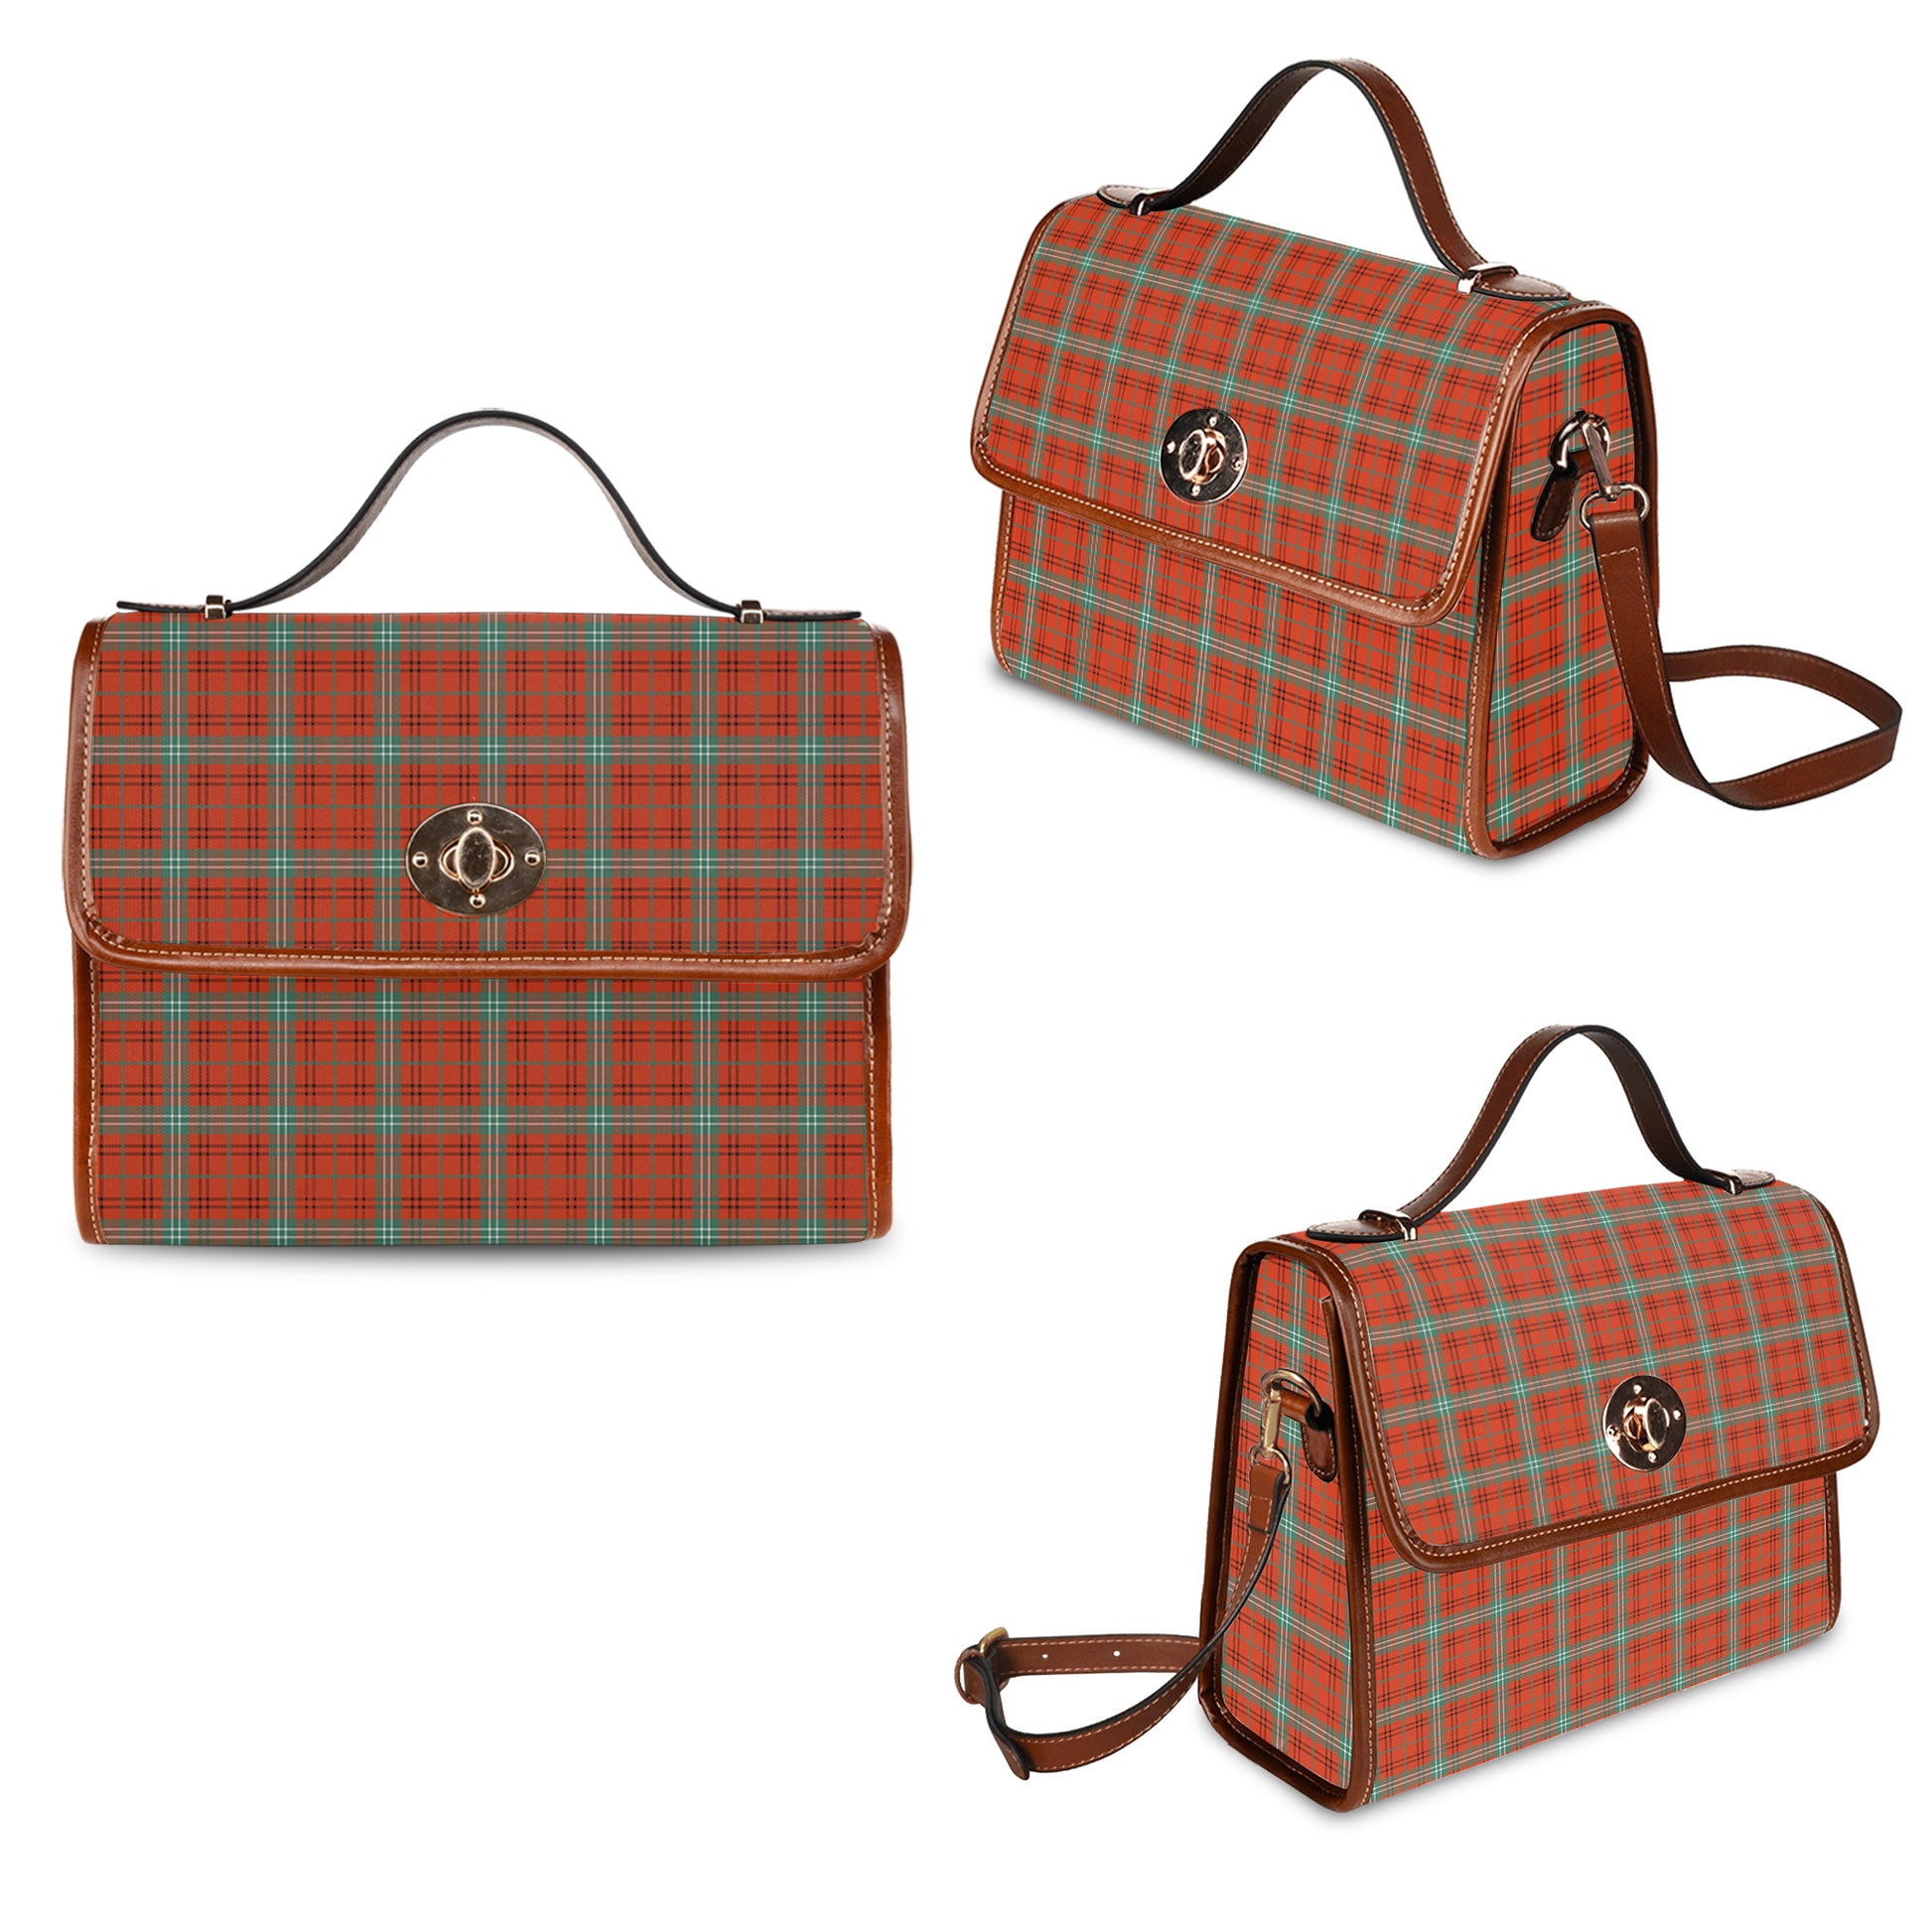 morrison-red-ancient-tartan-leather-strap-waterproof-canvas-bag